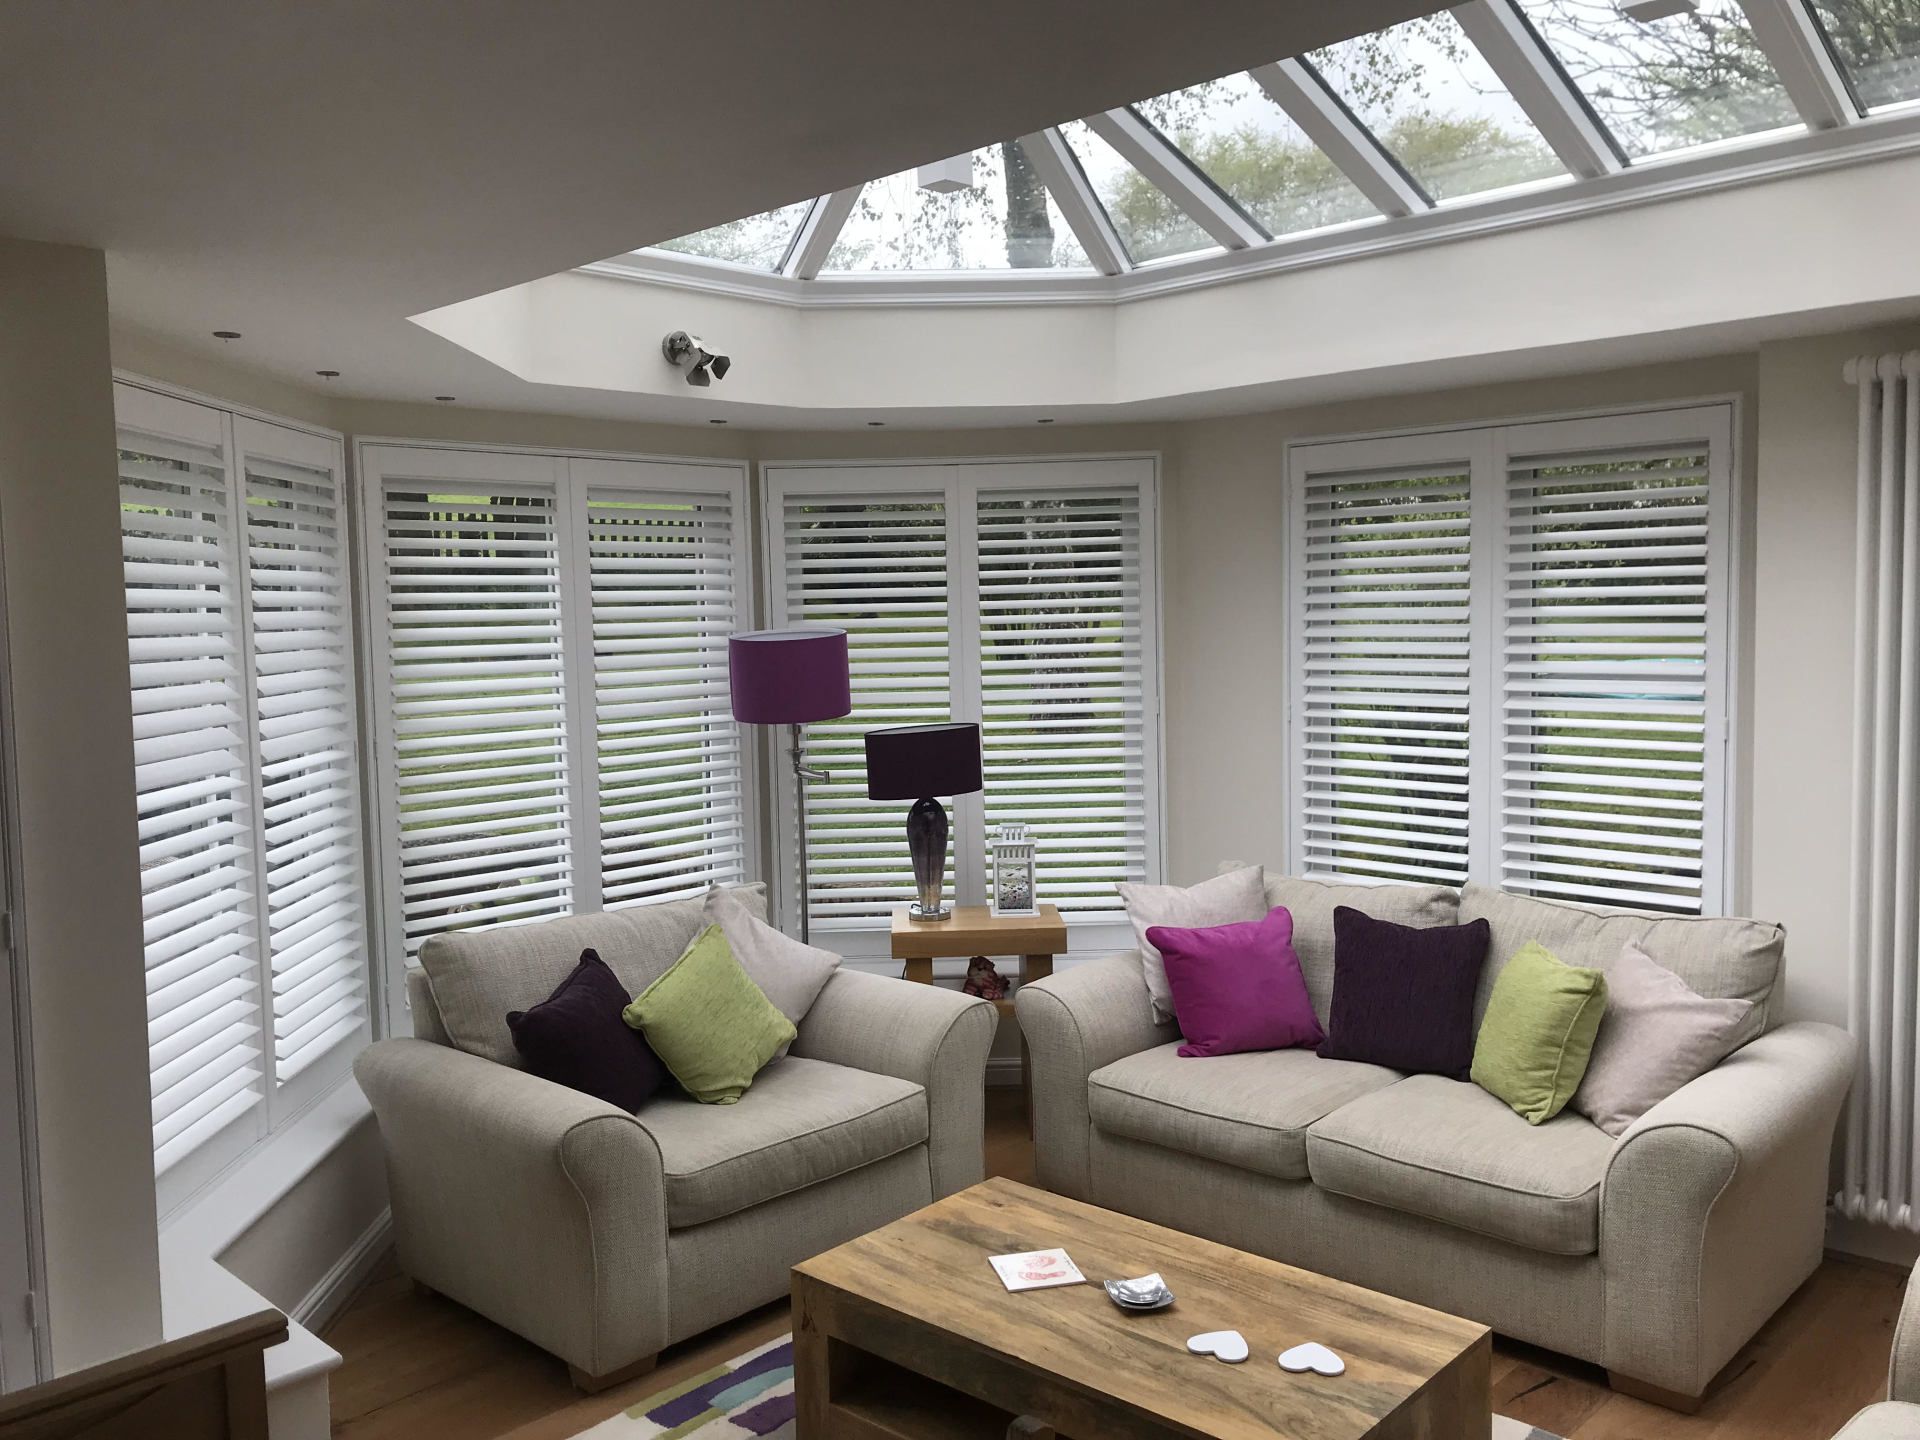 British Made Shutters available to purchase in Thornton Heath | Wooden Shutters | Patio Door Shutters |  Made-to-Measure Shutters